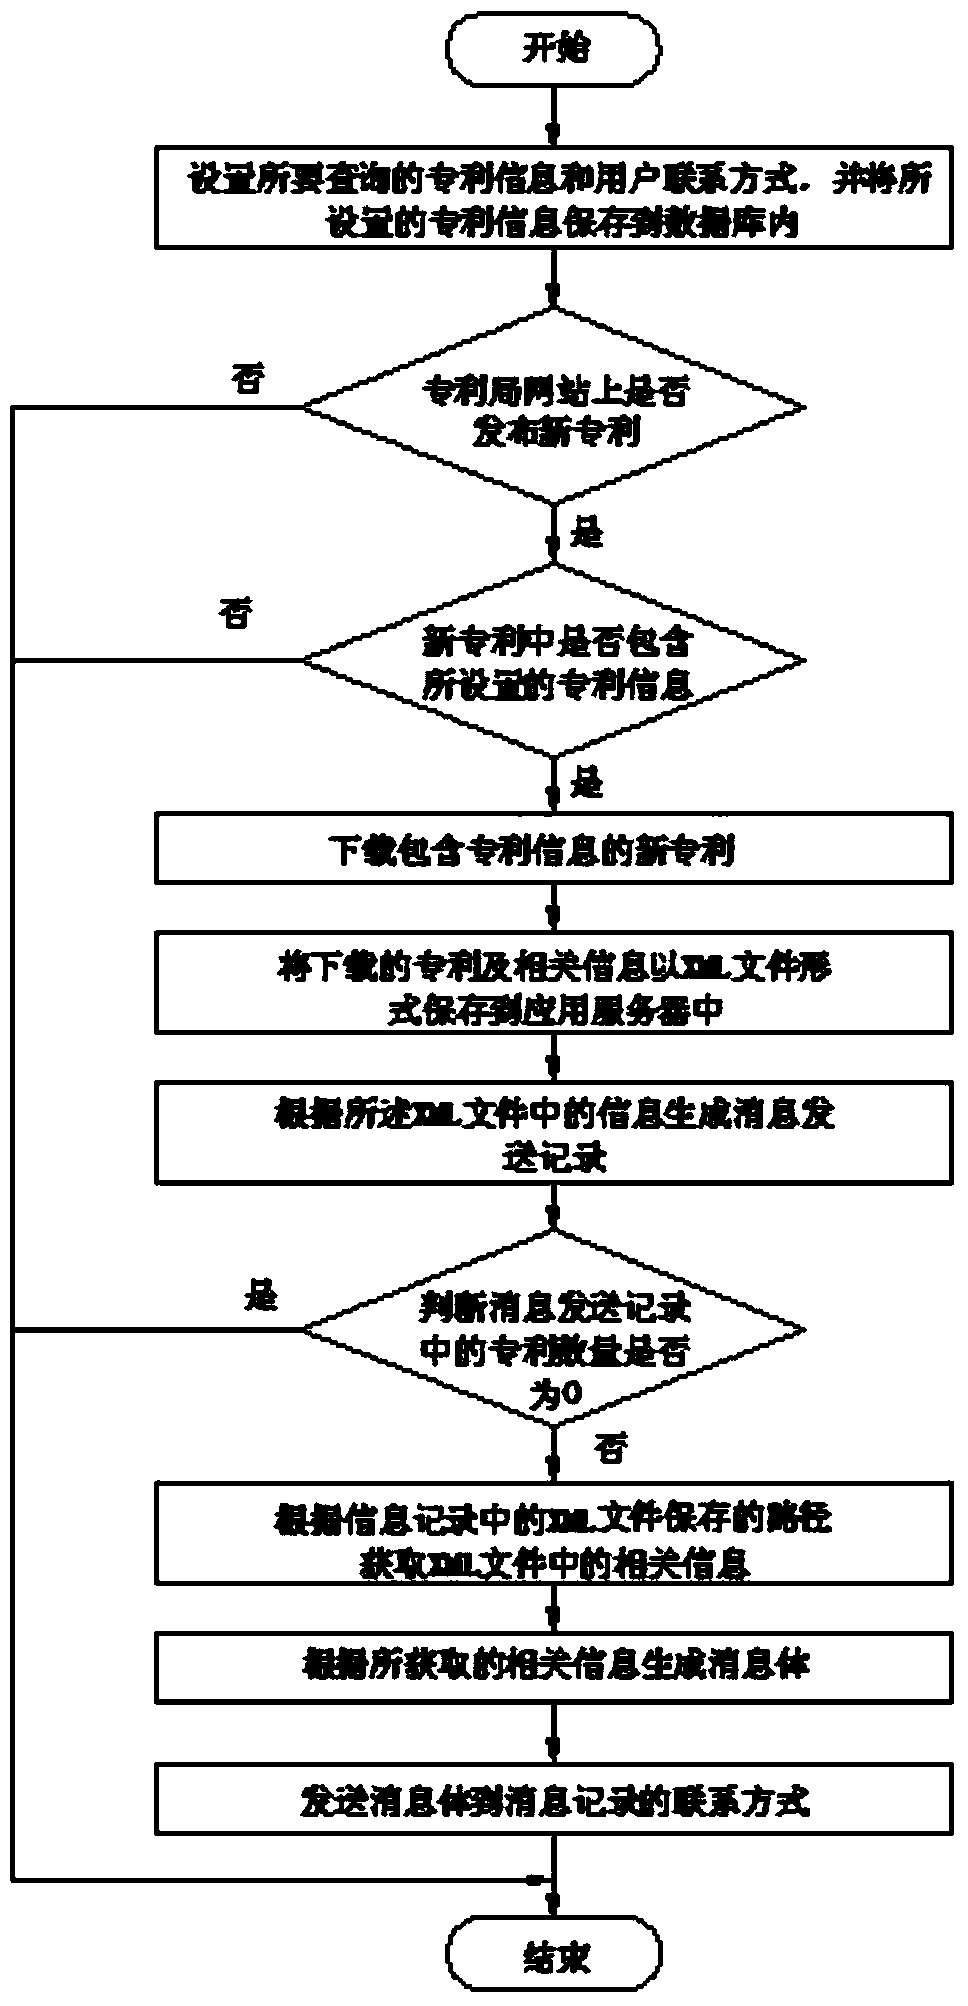 Patent information service system and method